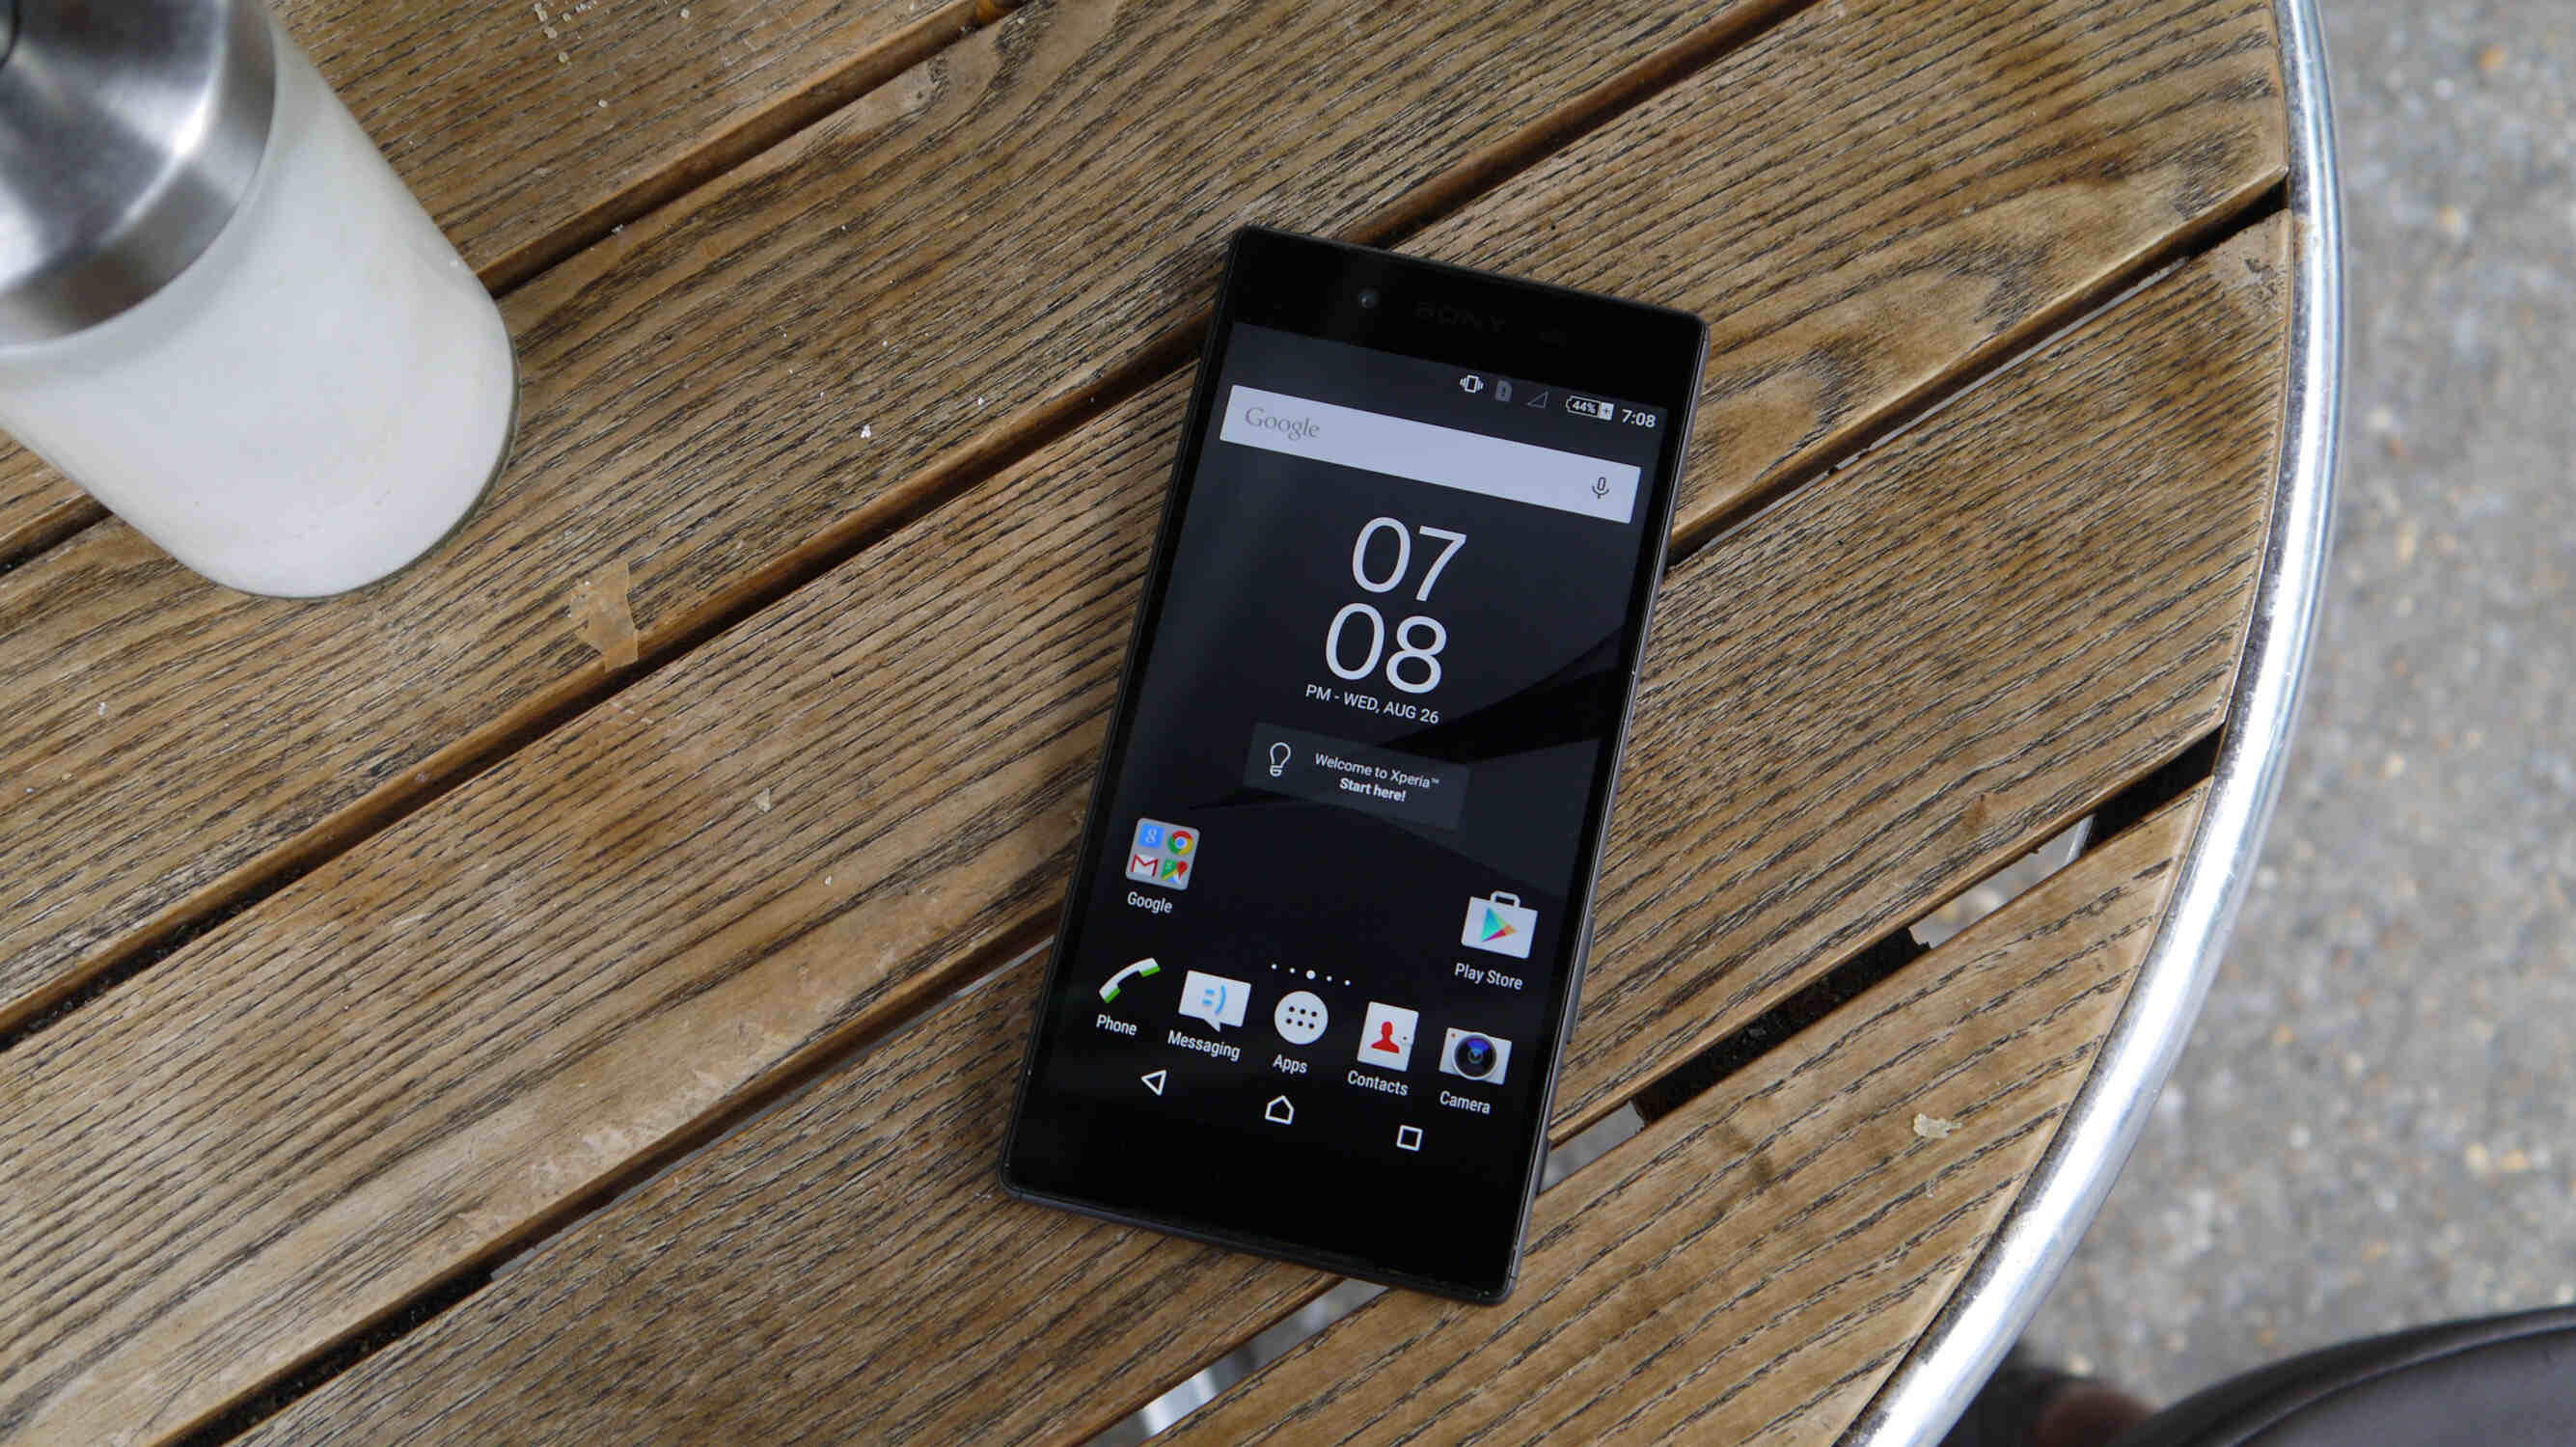 Troubleshooting Data Transfer Issues On Xperia Z5